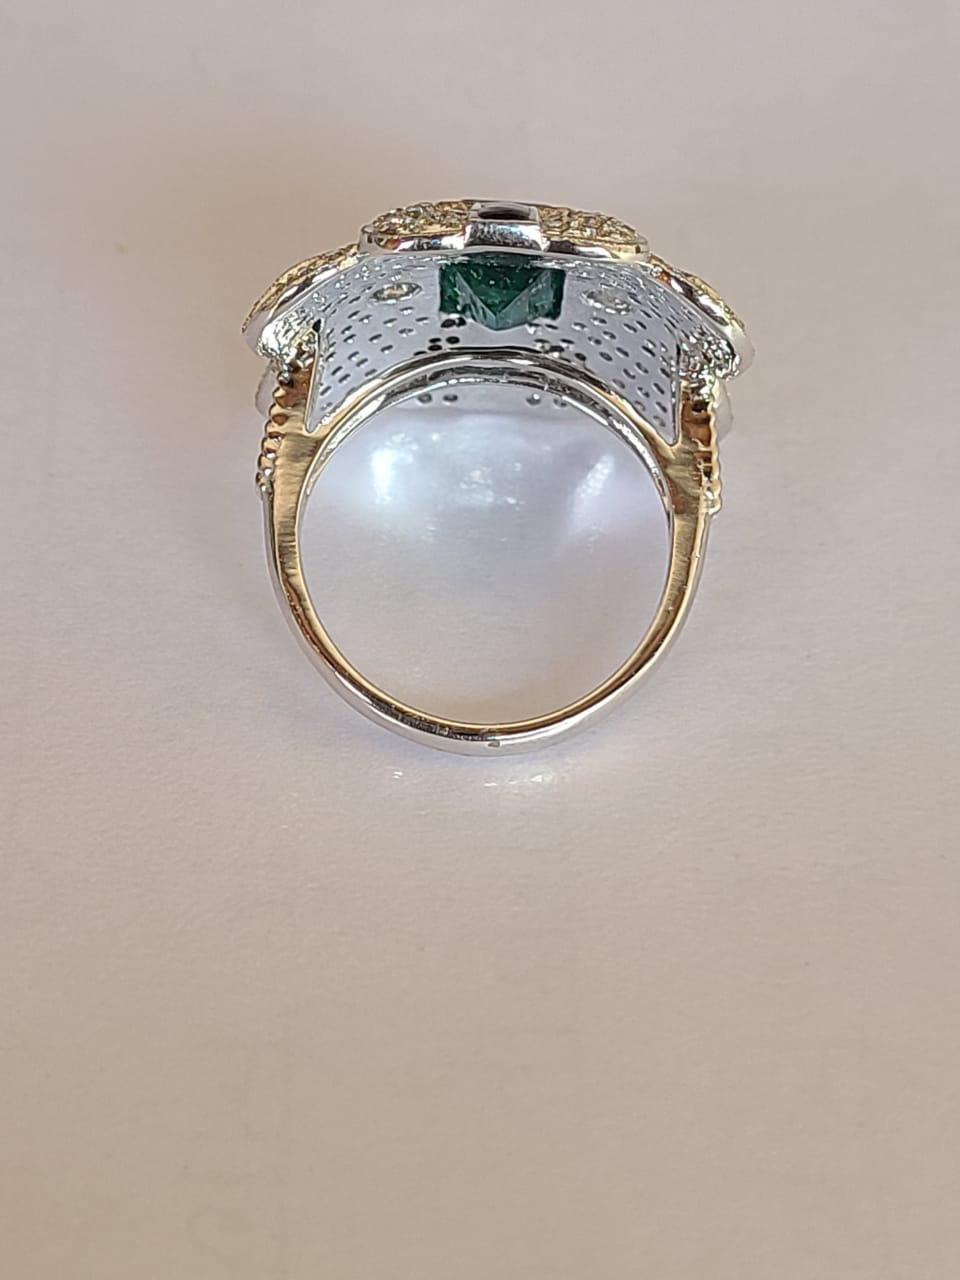 2.28 Carat Natural Emerald Diamond Ring Set with Black Enamel in 18 Karat Gold In New Condition For Sale In Hong Kong, HK